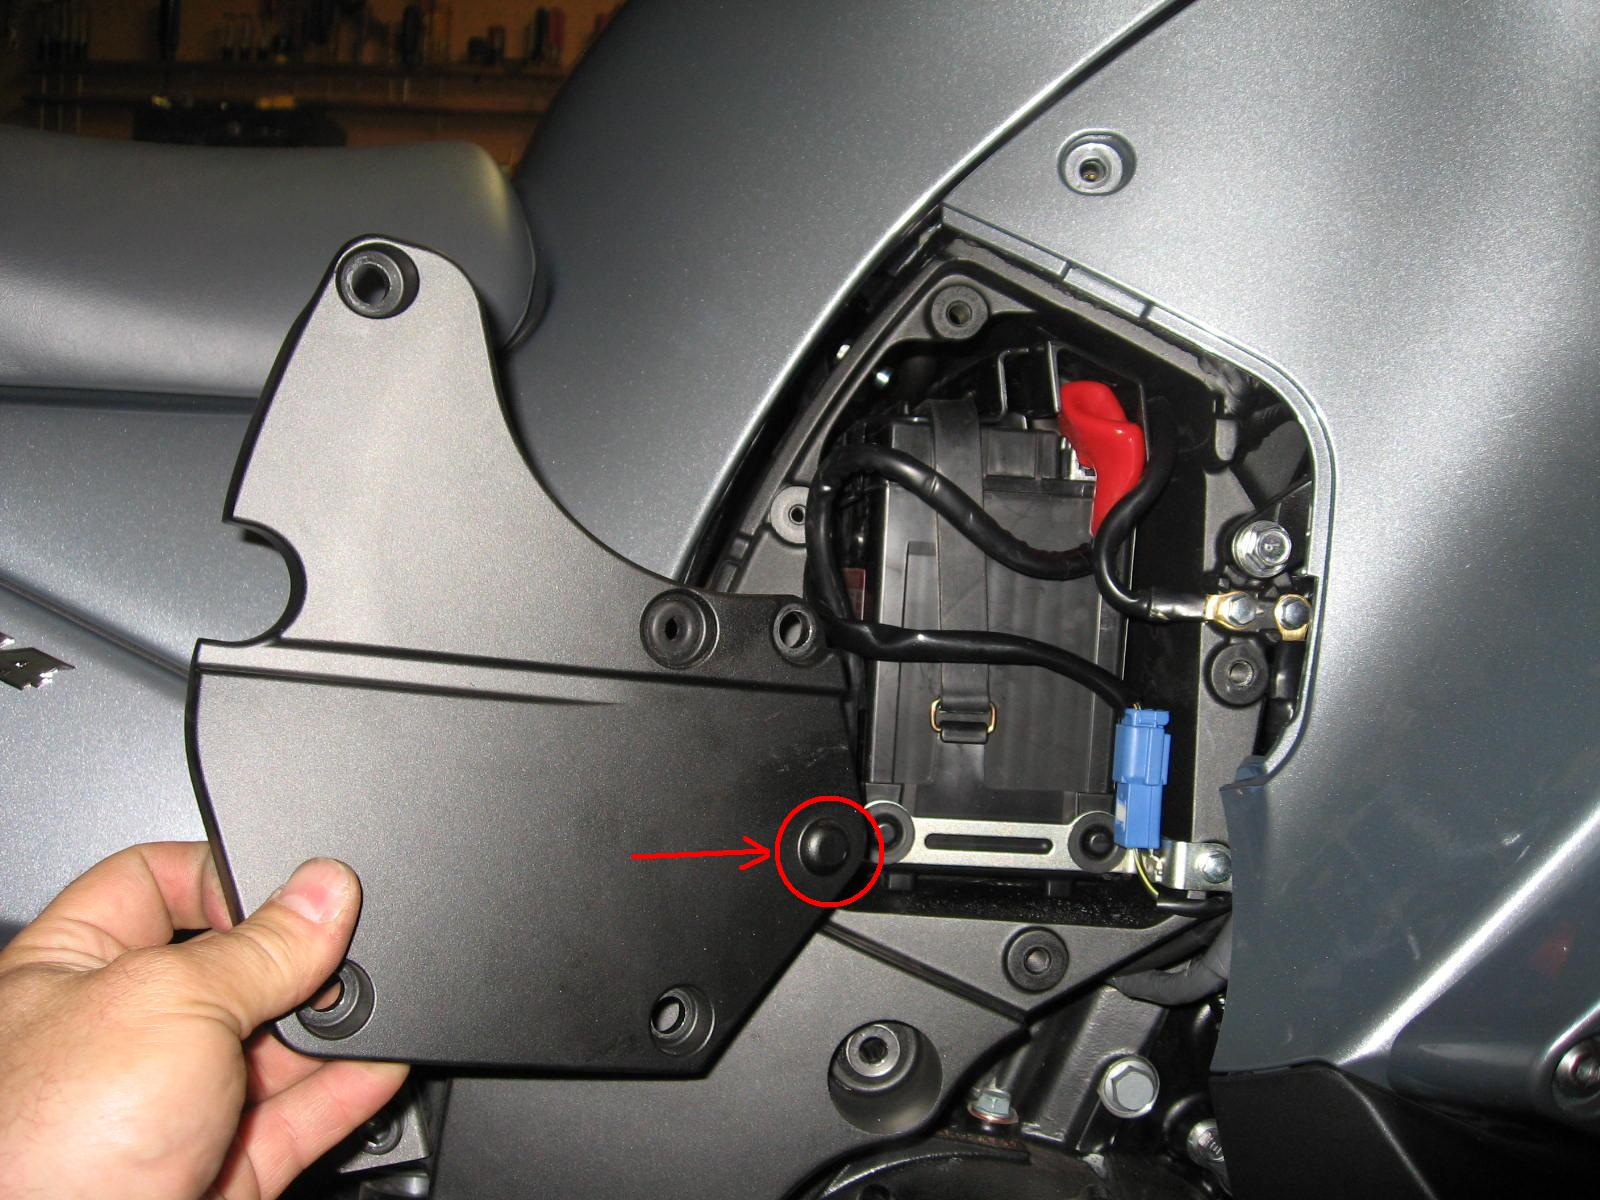 Battery cover plate